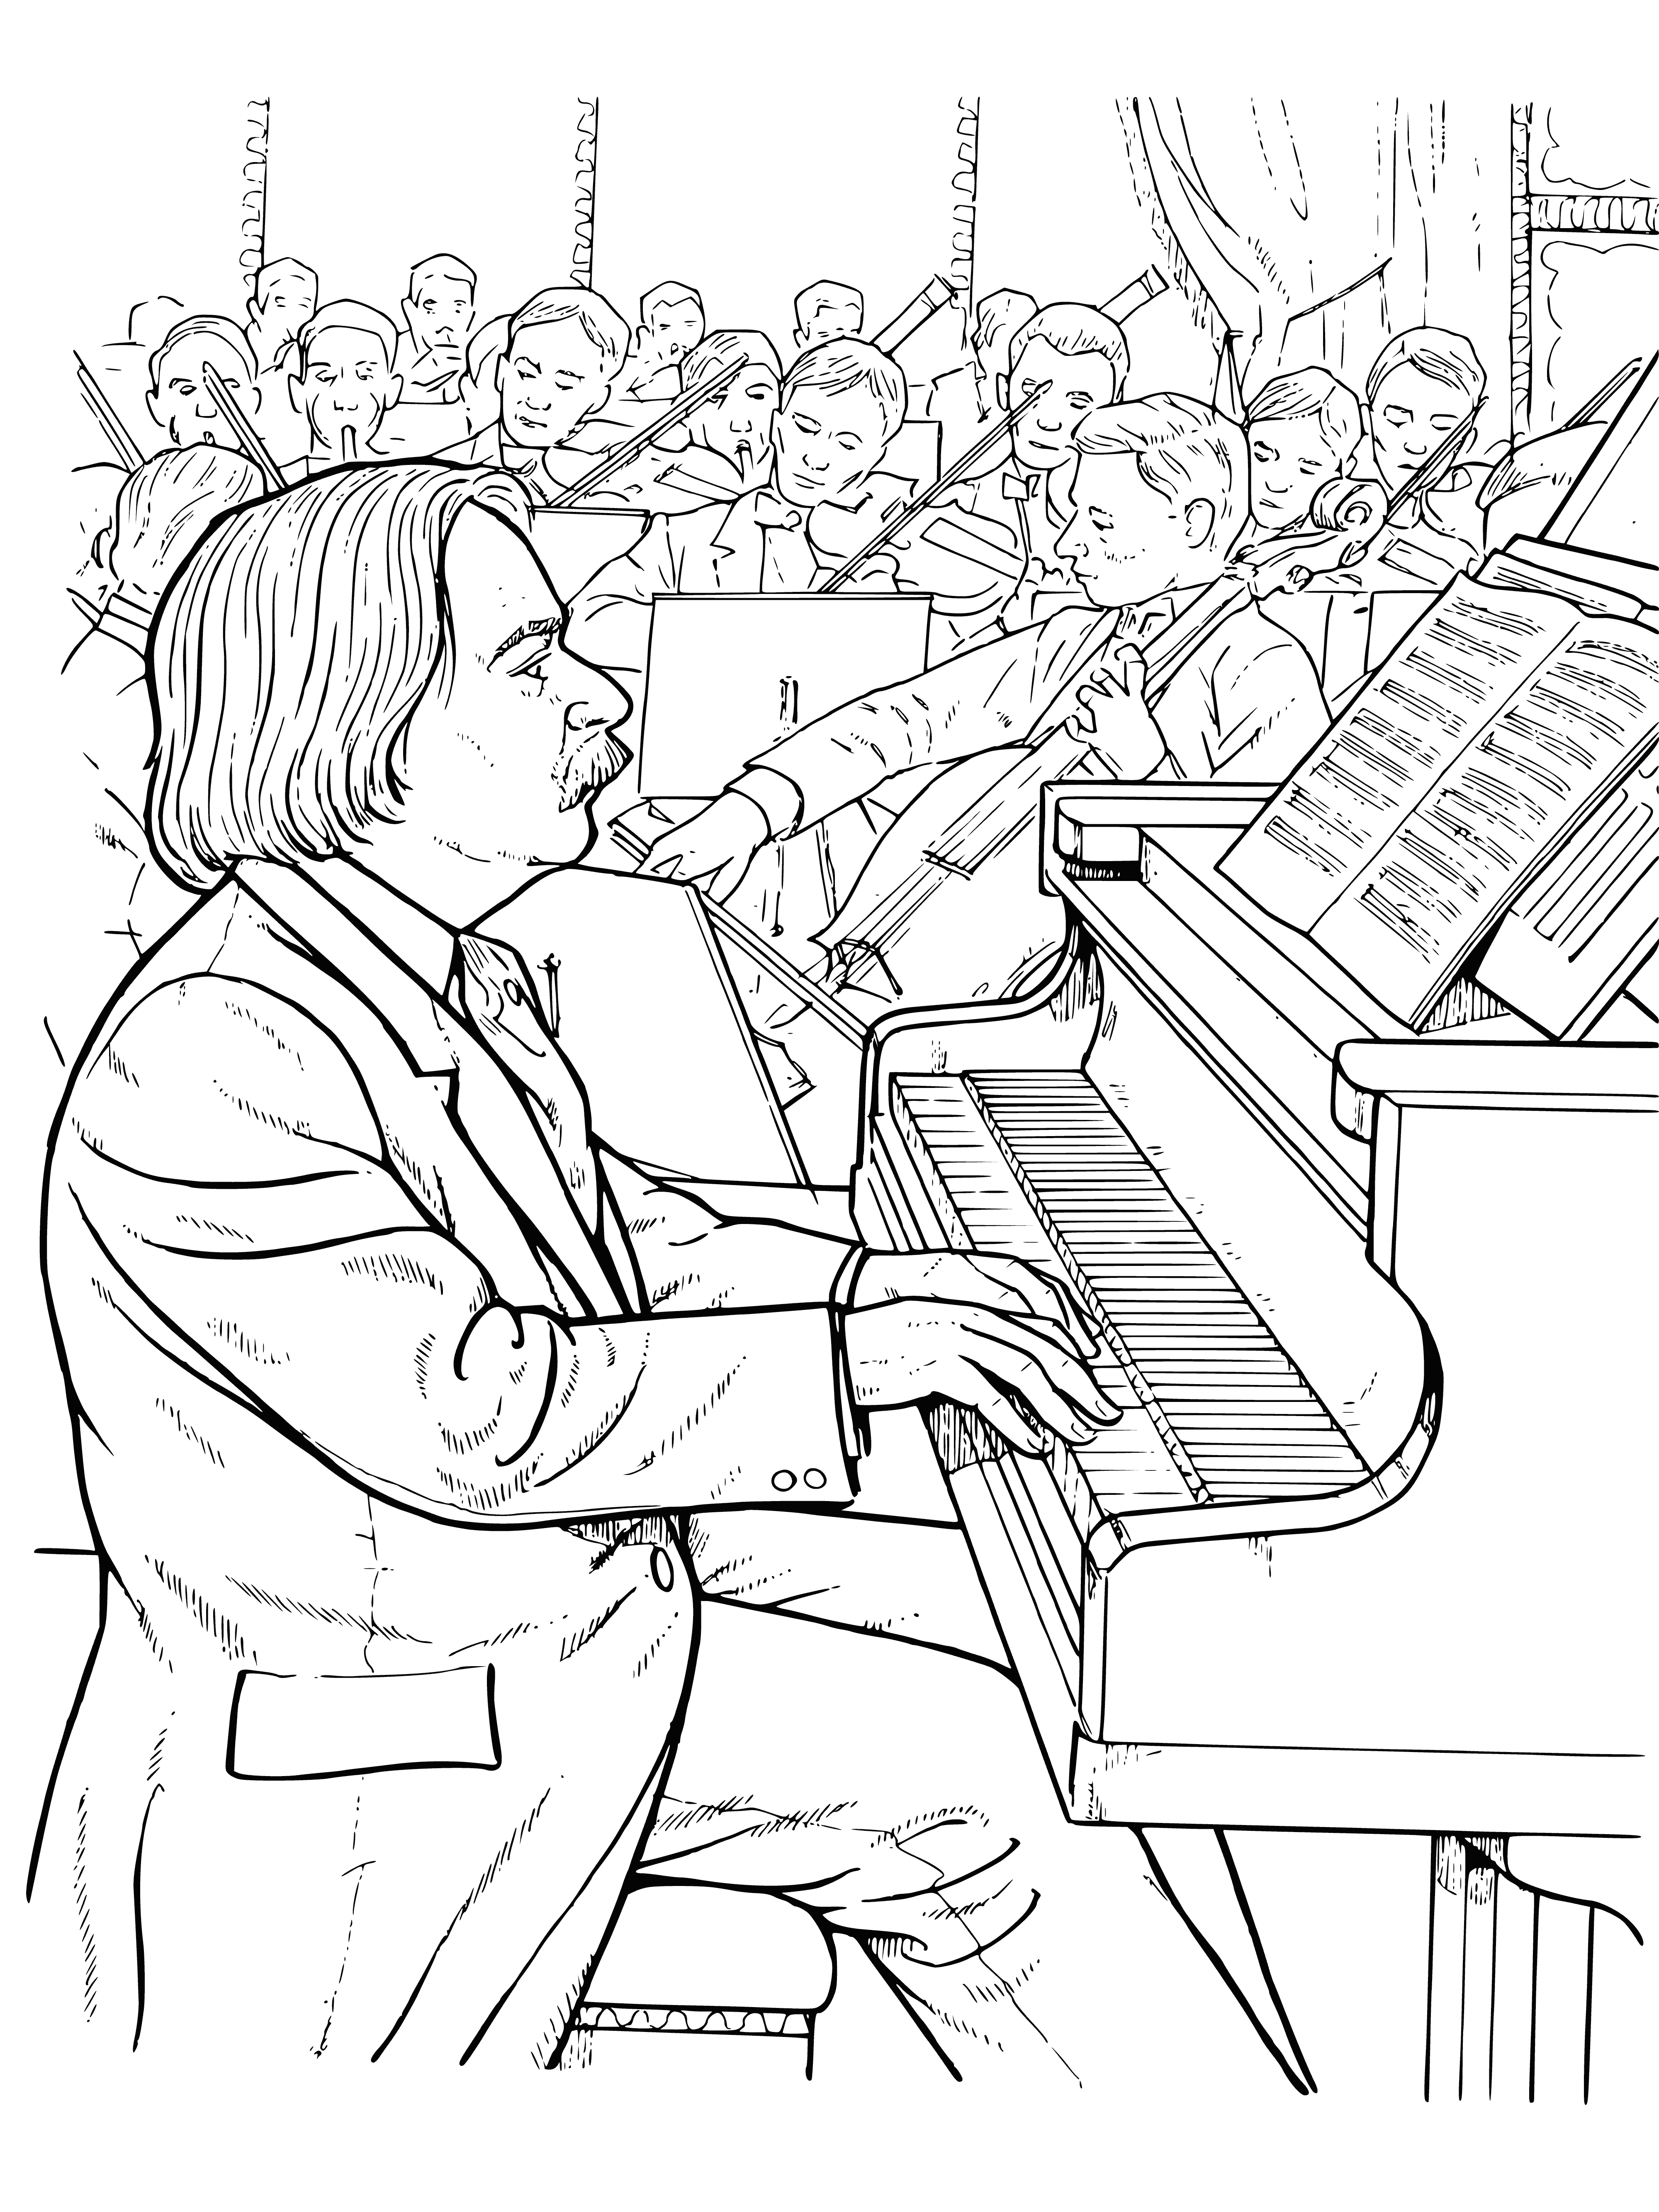 coloring page: Young pianist in white dress playing seriously in large room - concentrating on playing.